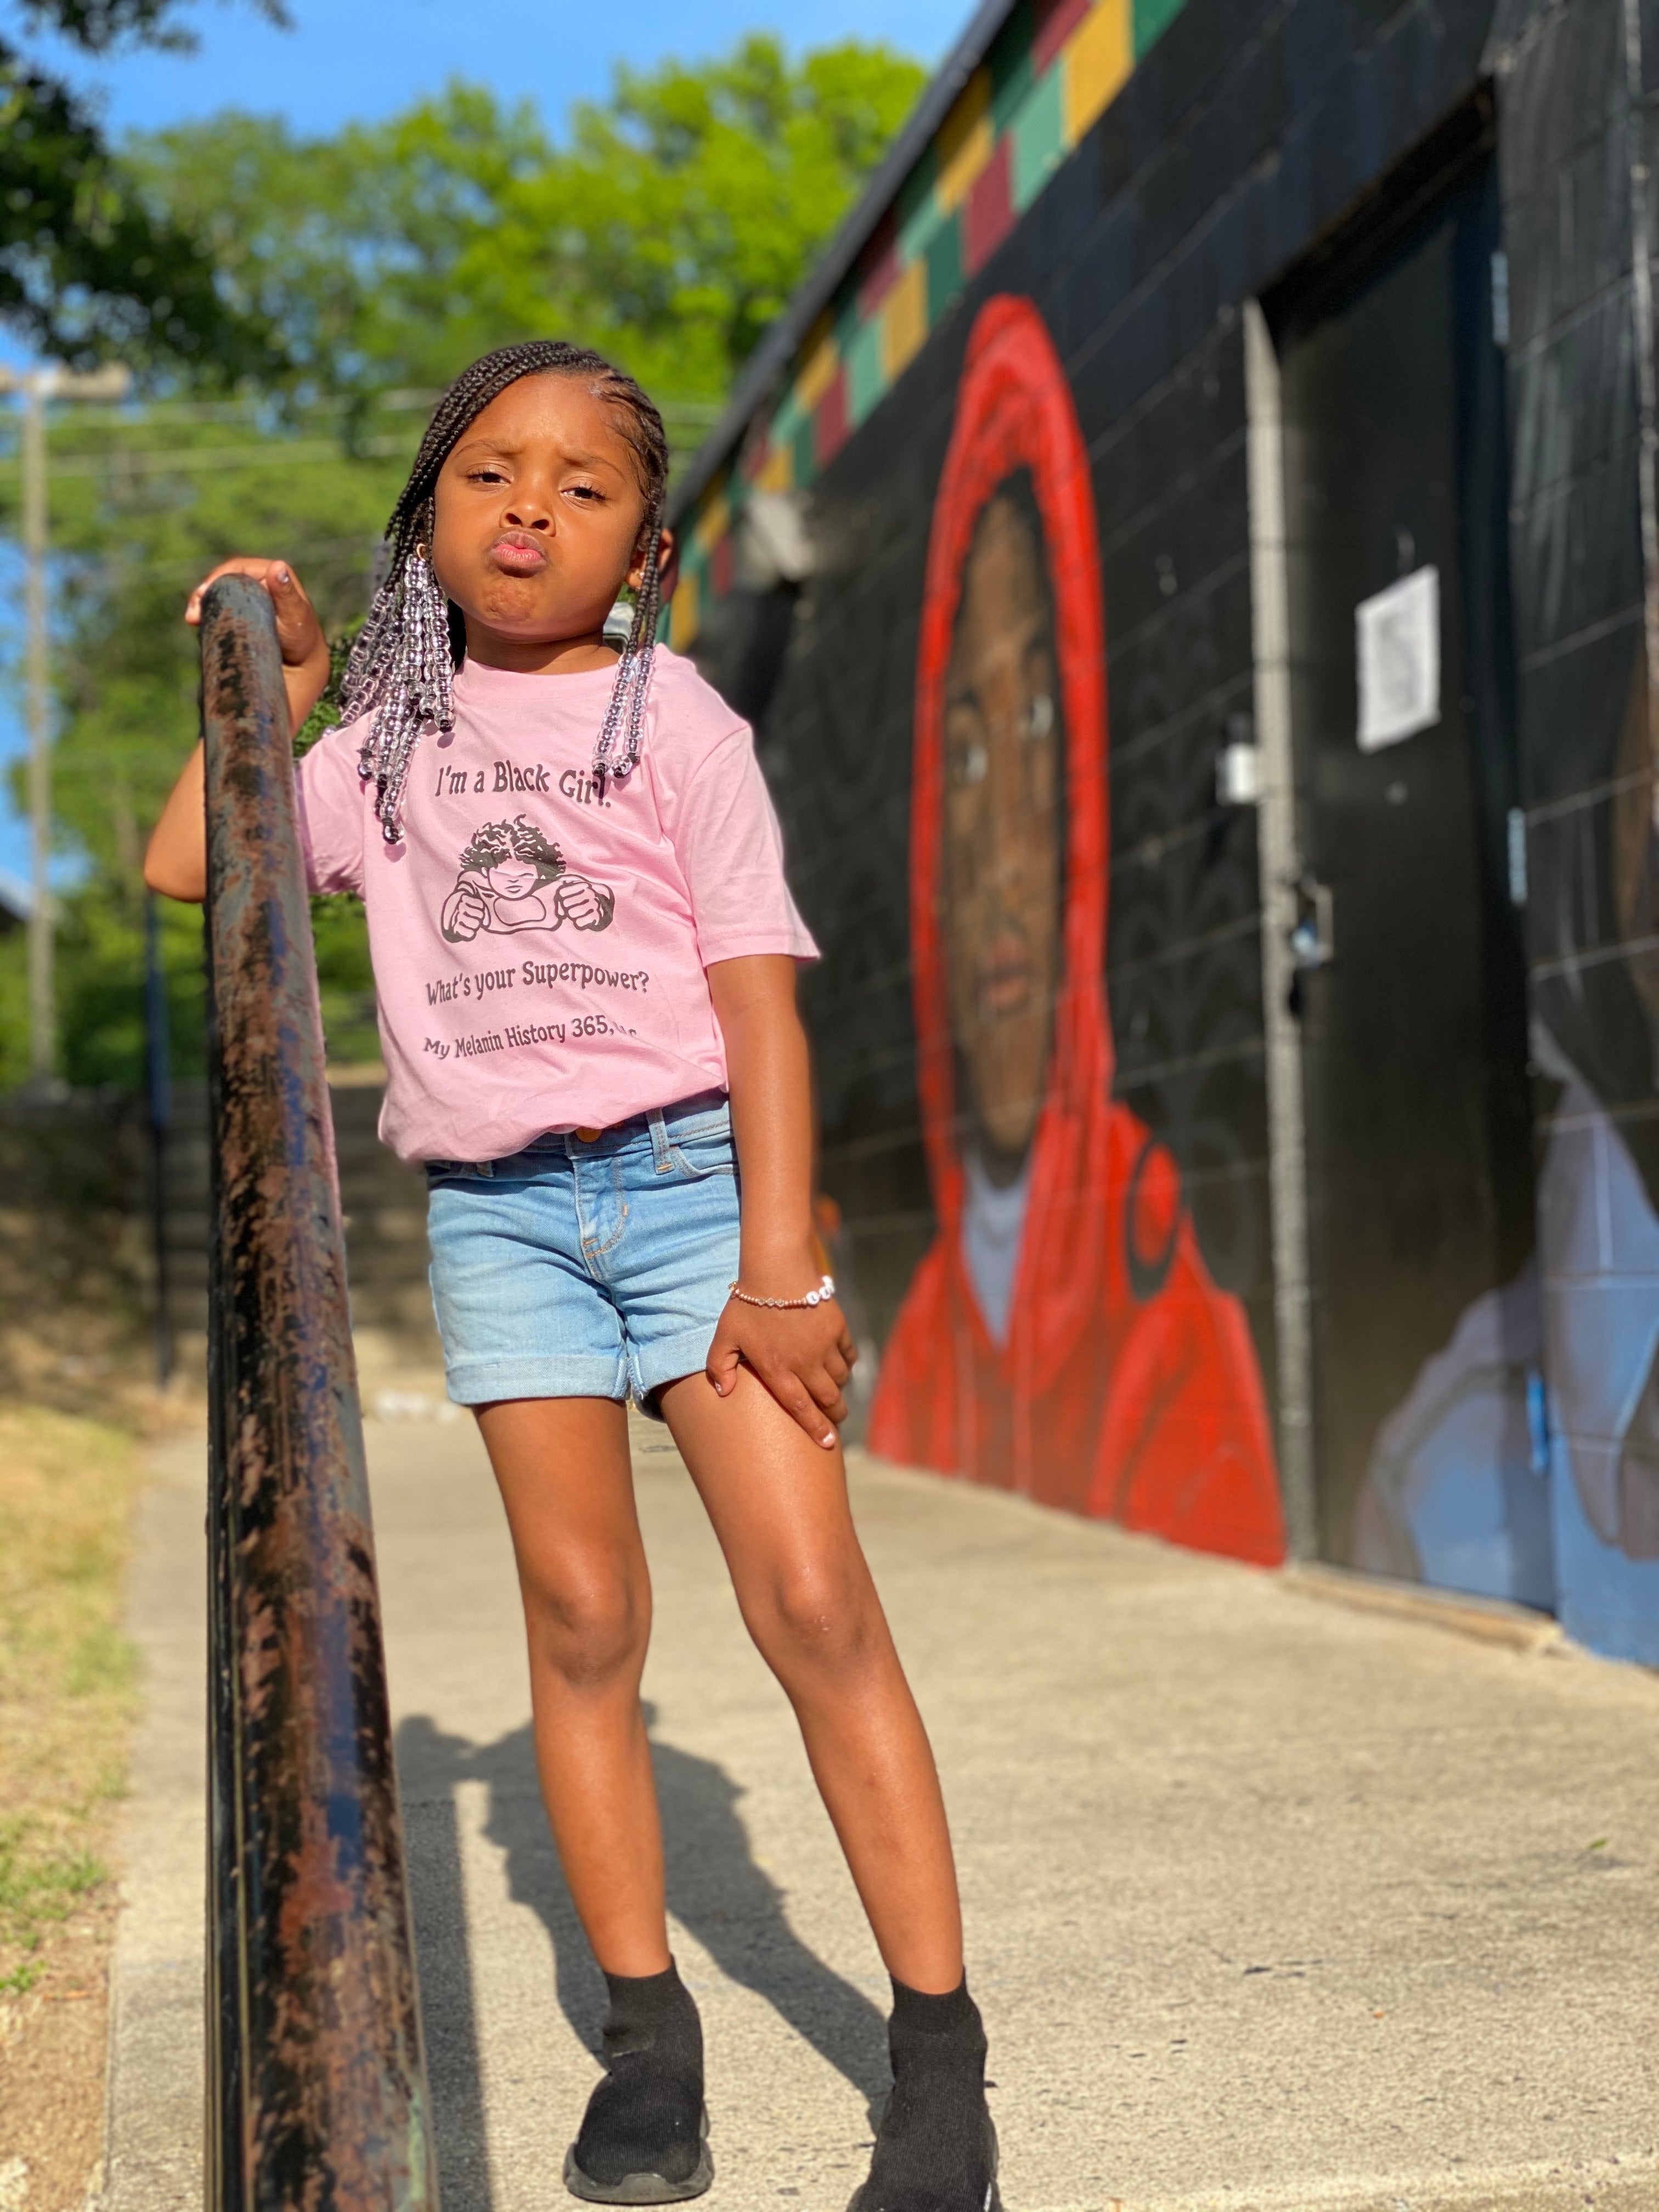 "I'm a Black Girl...What's your Superpower?" (KIDS)